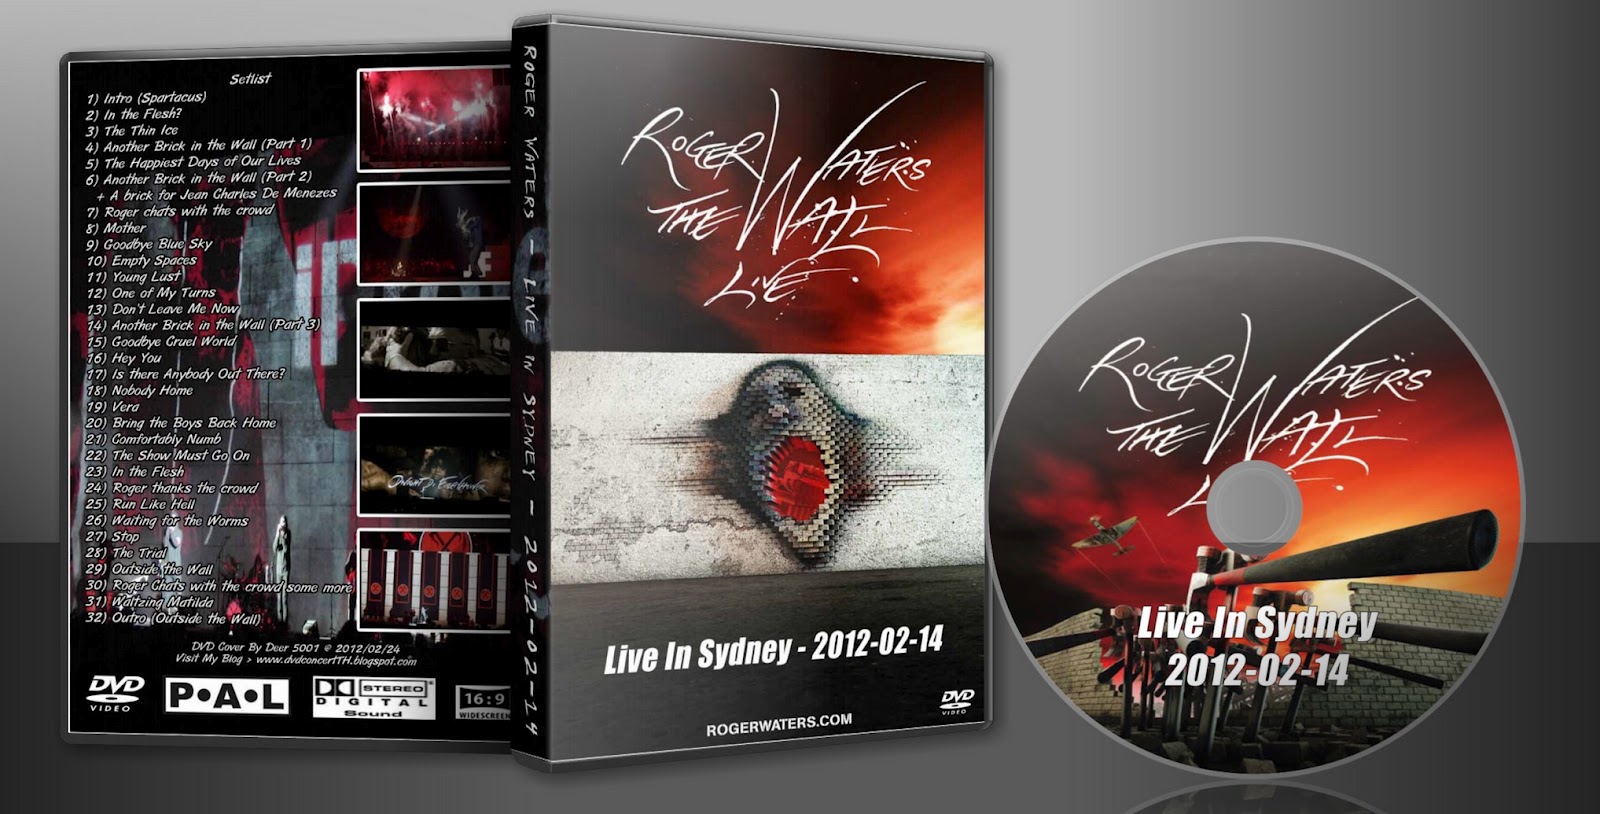 http://3.bp.blogspot.com/-p9wr95MOz5o/T0rELhVQY3I/AAAAAAAAFHQ/9HIKAQCMJbM/s1600/DVD+Cover+For+Show+-+Roger+Waters+-+2012-02-14+-+Live+in+Sydney.jpg